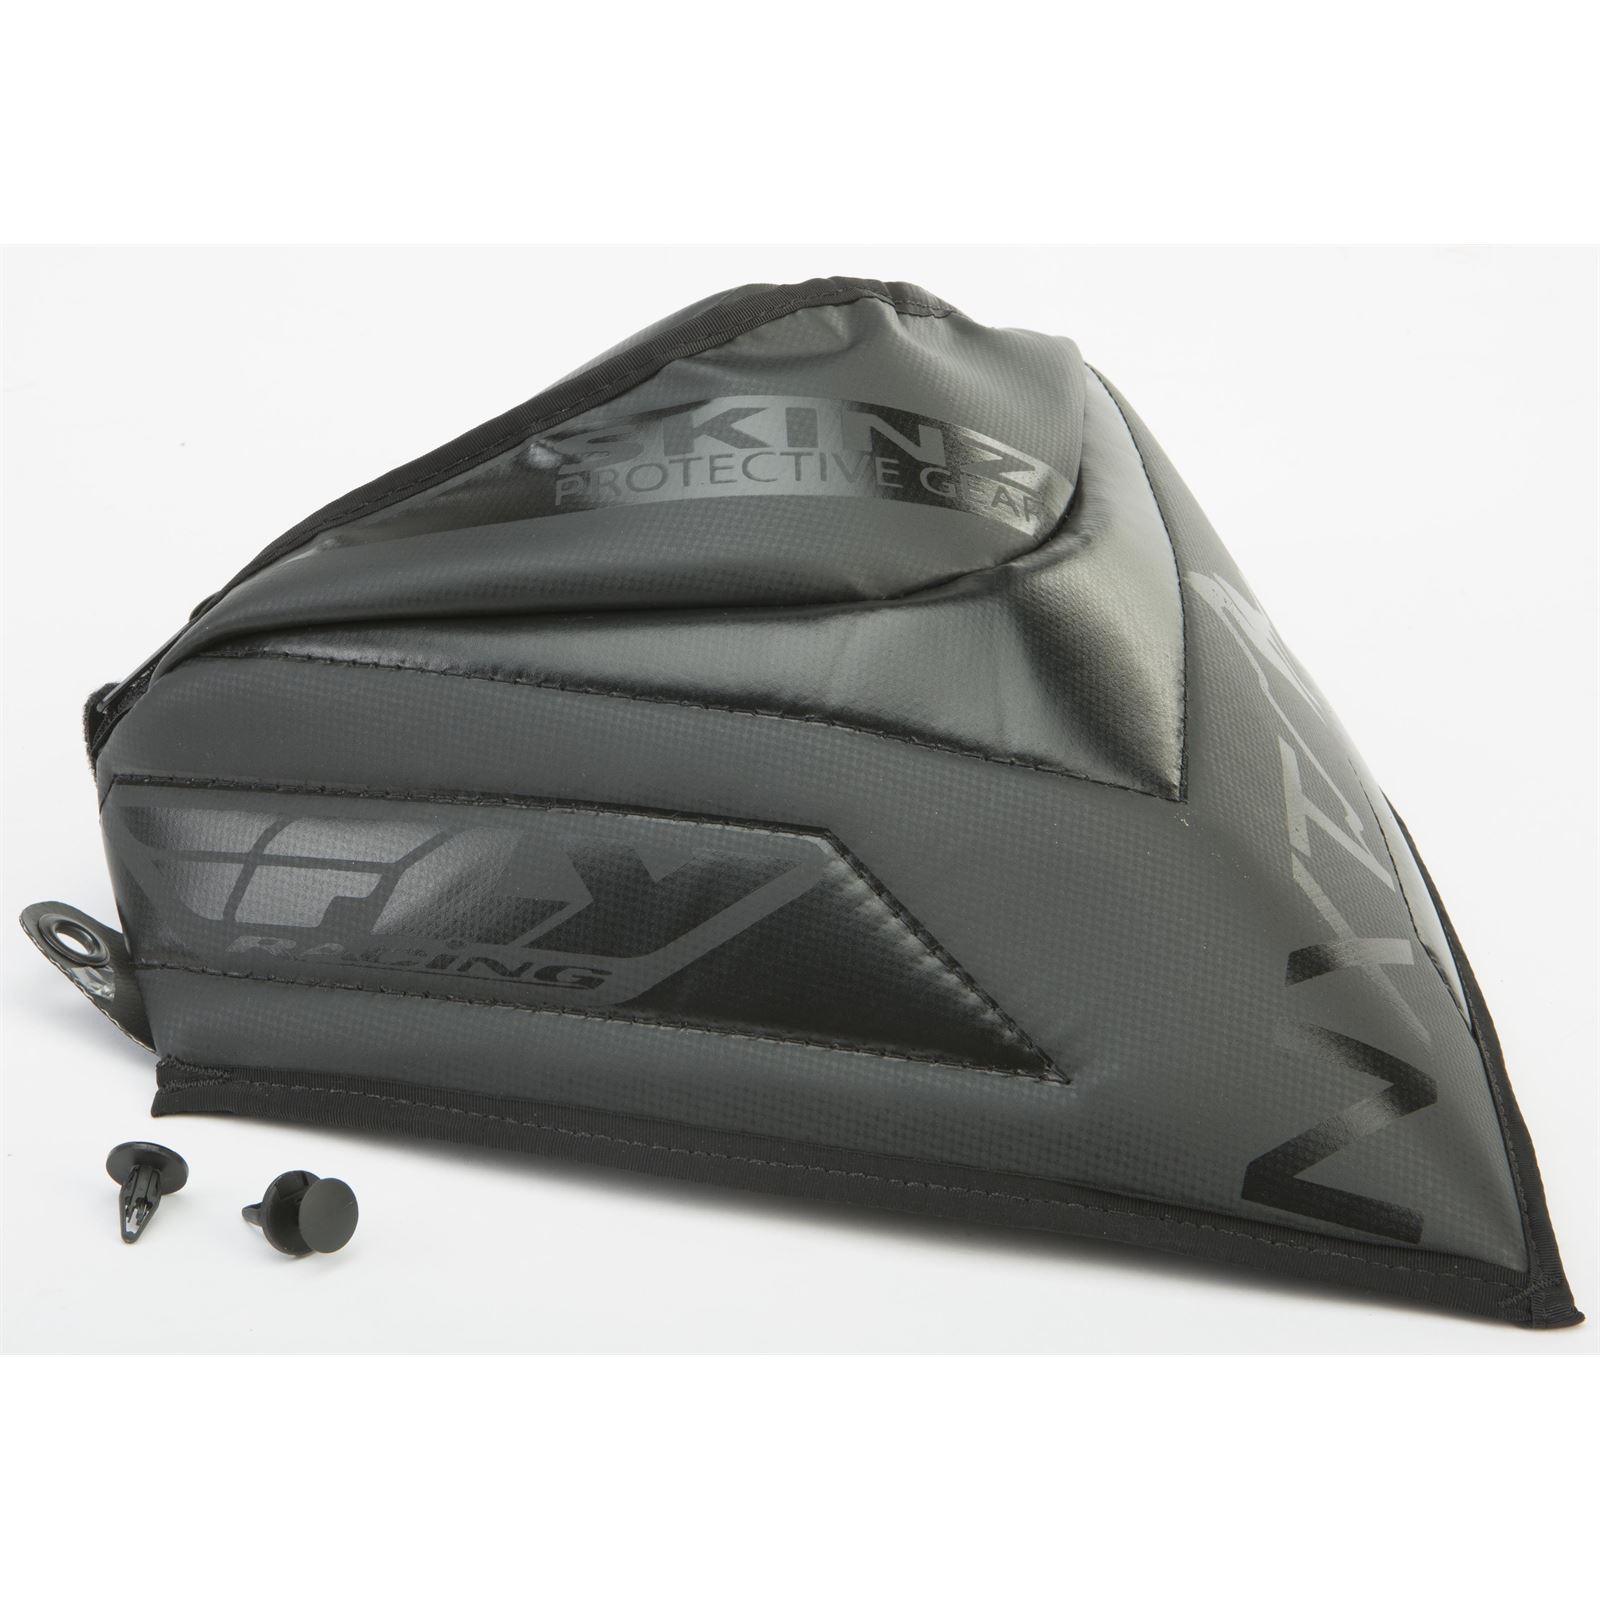 SPG NXT LVL Vented Windshield Pack - Motorcycle, ATV / UTV  Powersports  Parts | The Best Powersports, Motorcycle, ATV  Snow Gear, Accessories and  More